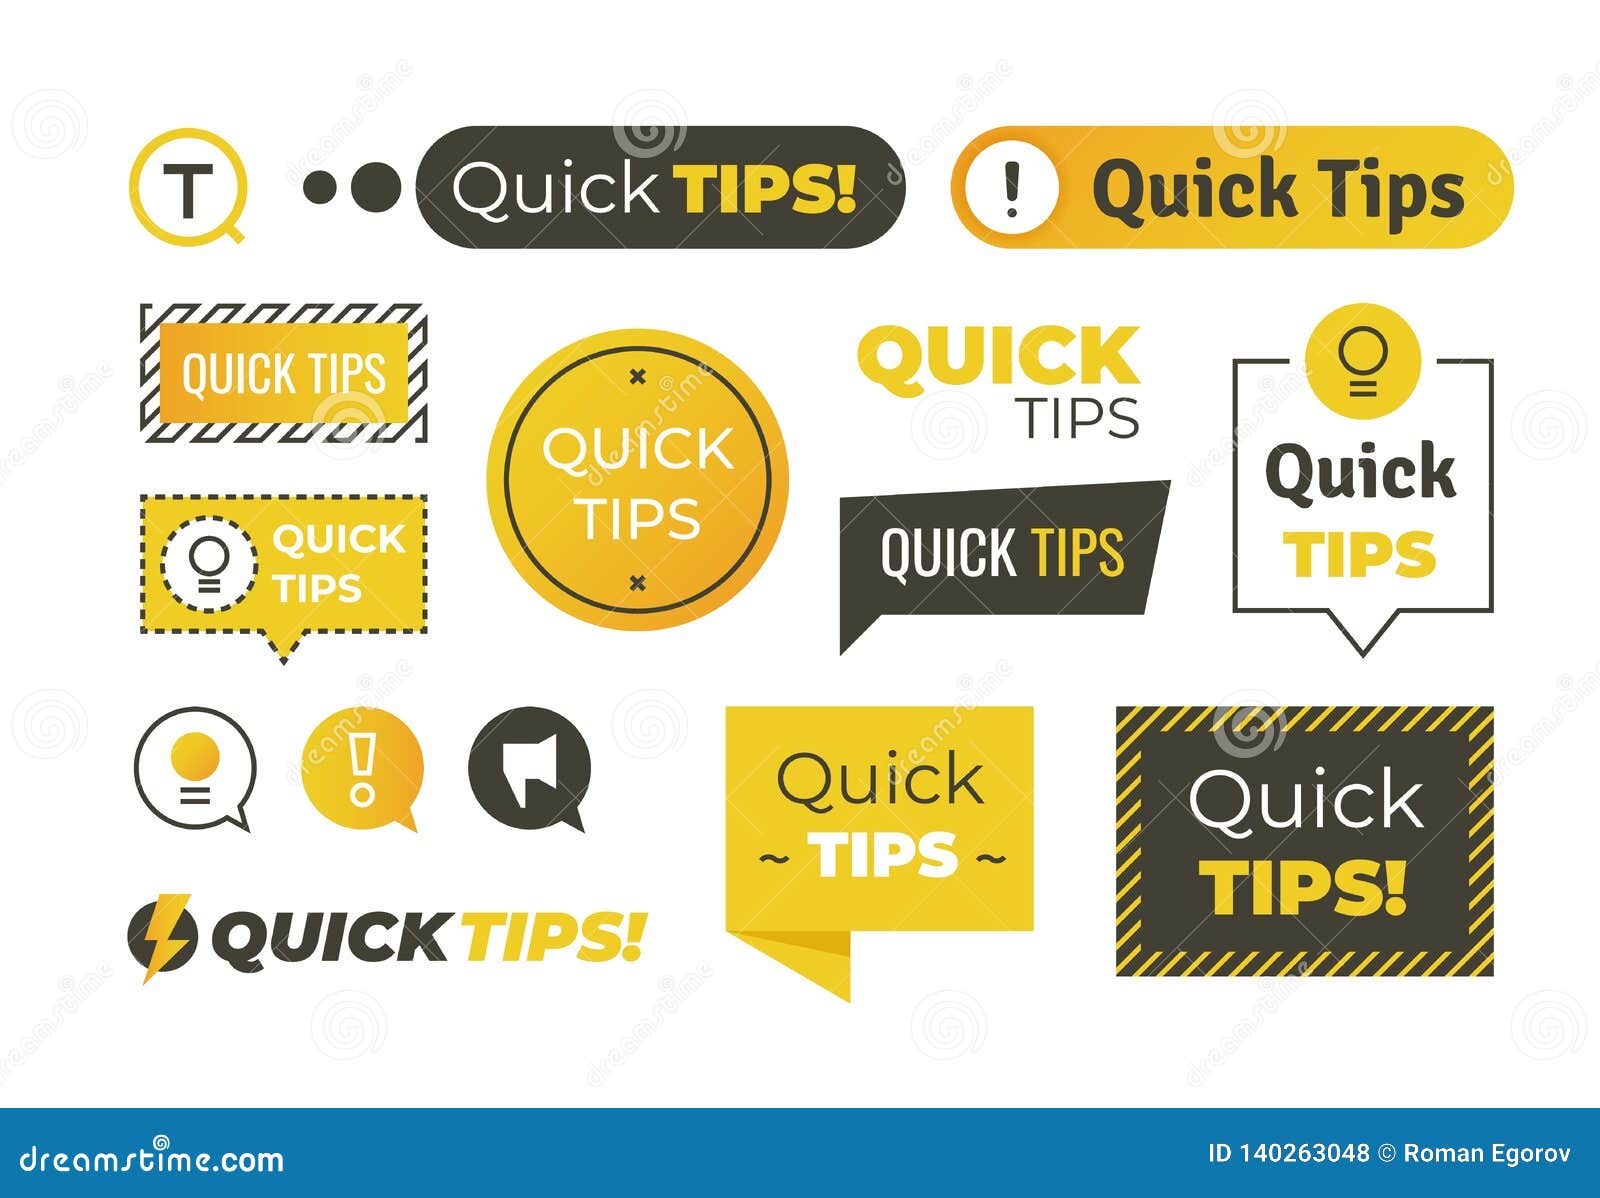 quick tips s. helpful tricks logos and banners, advices and suggestions emblems.  quick helpful tips